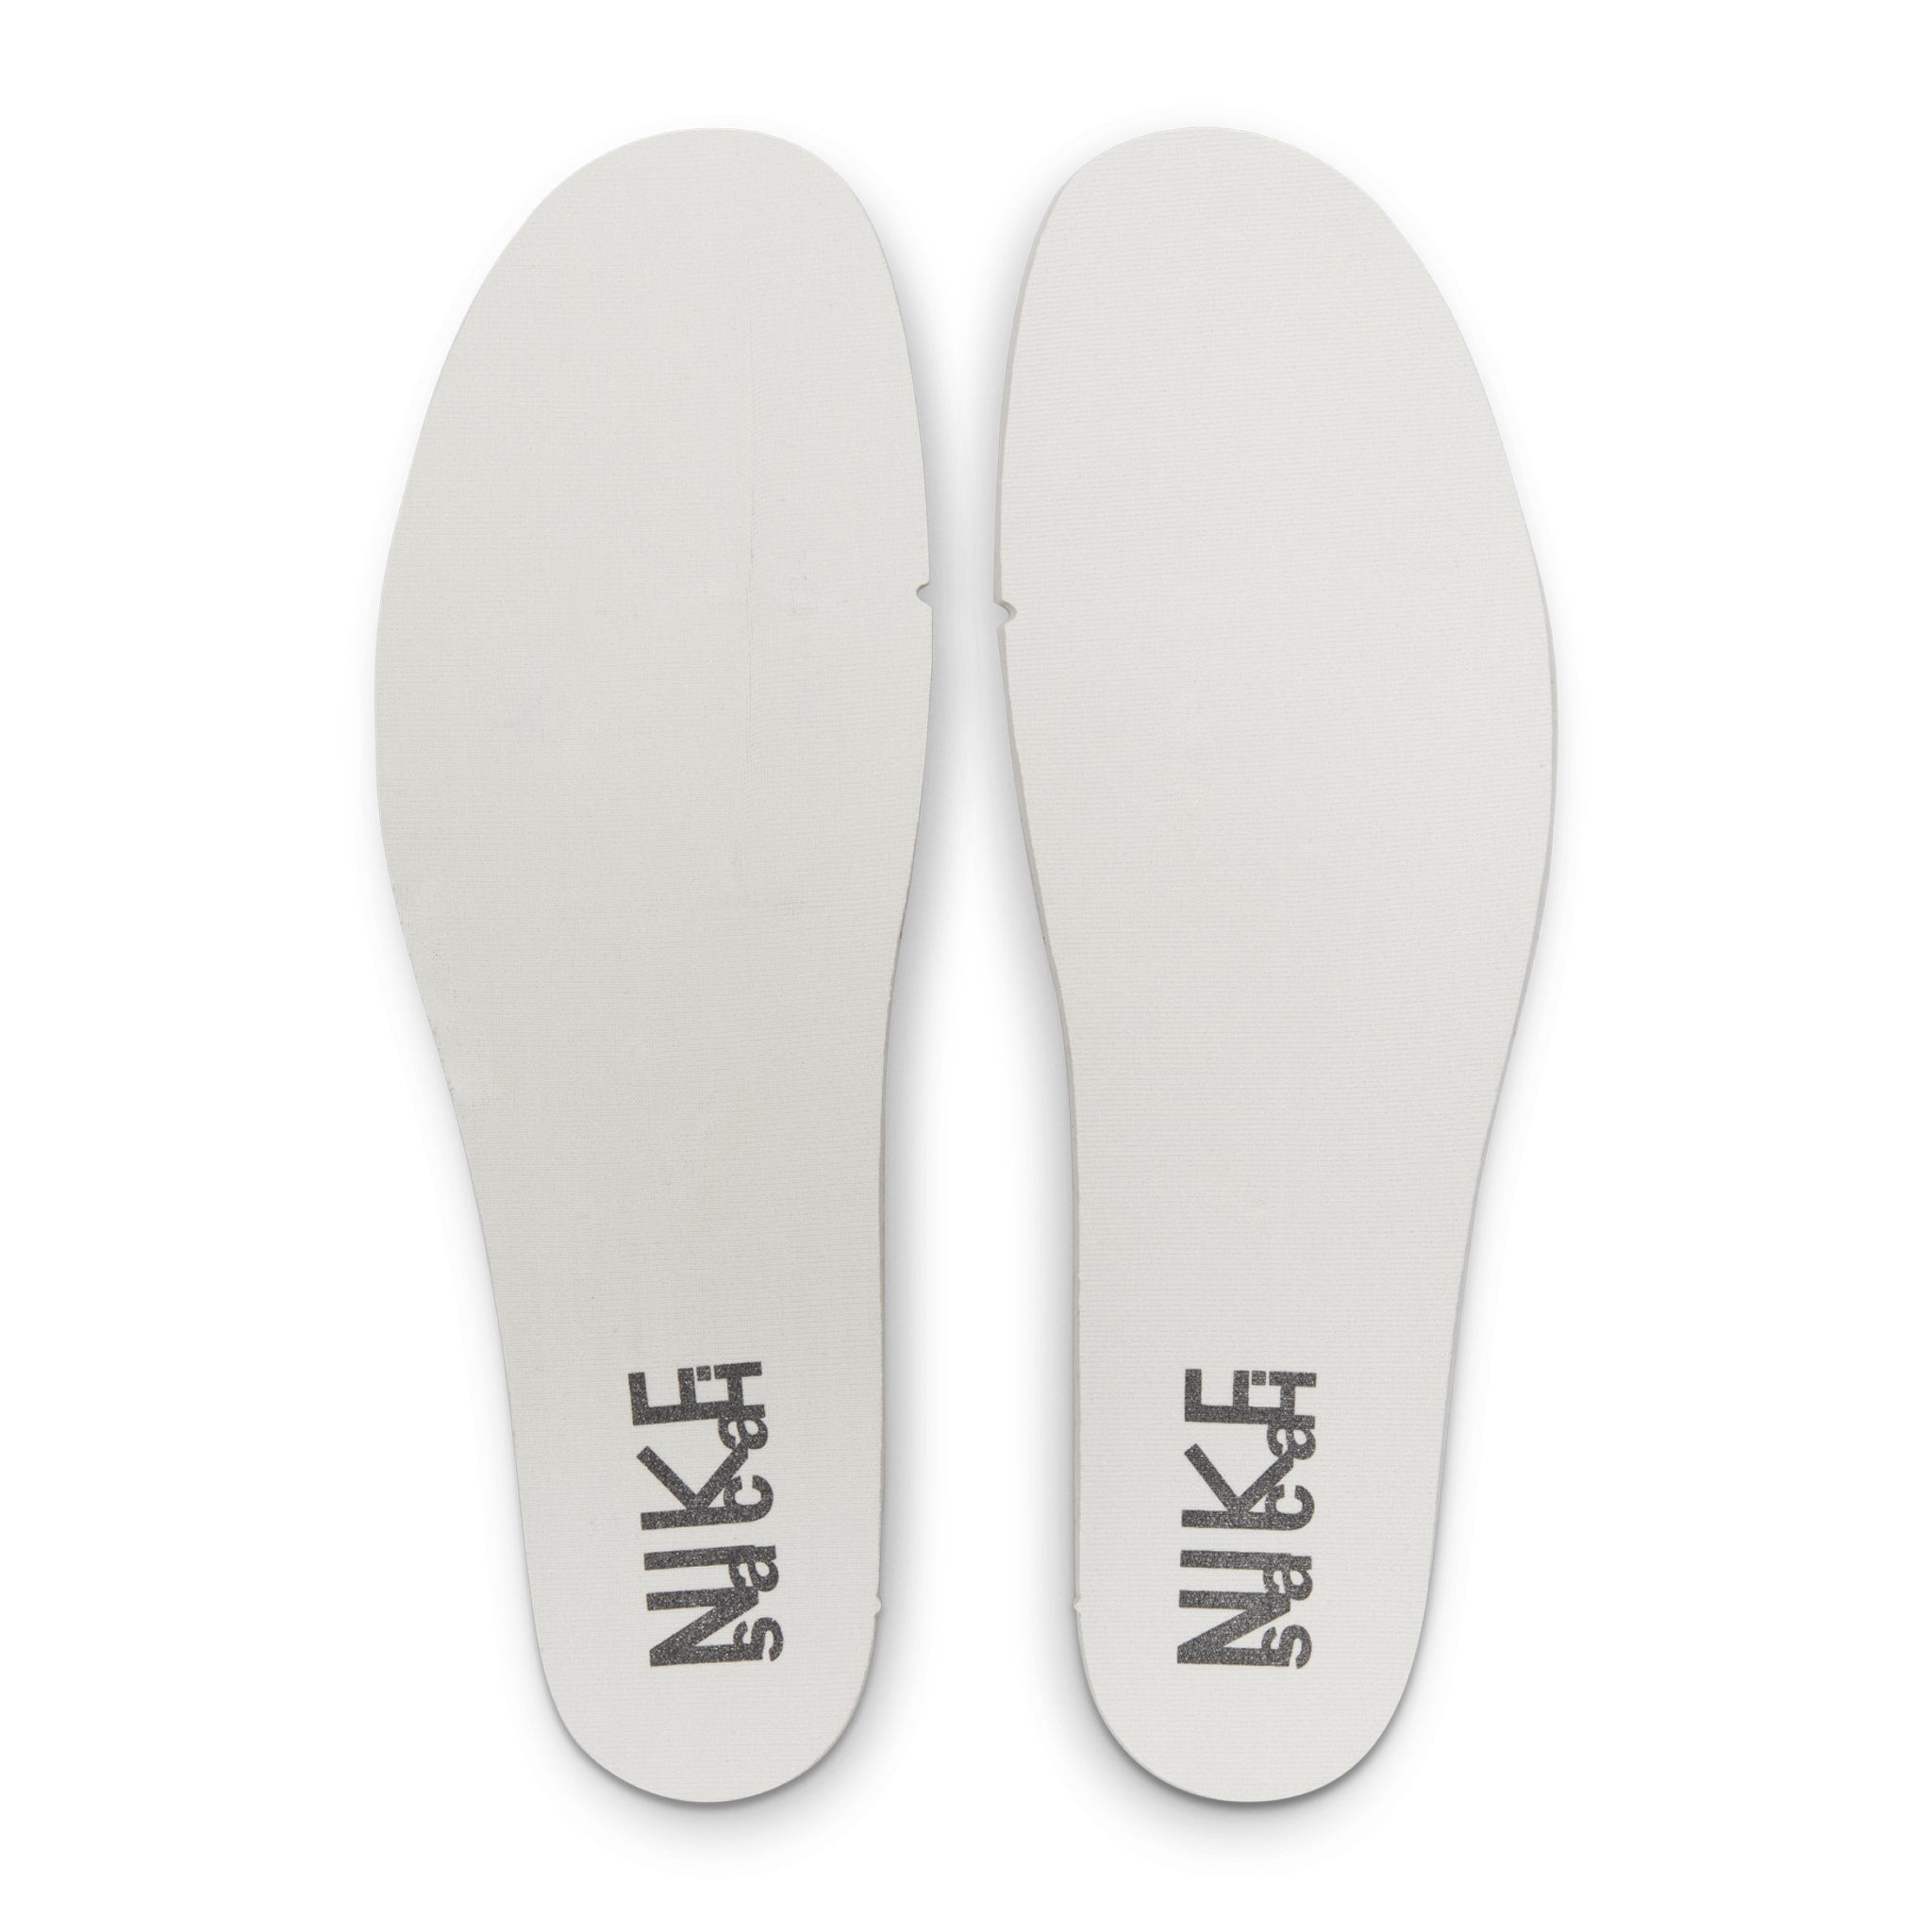 Insole view of Nike x Sacai LD Waffle Undercover Black Bright Citron DJ4877-001